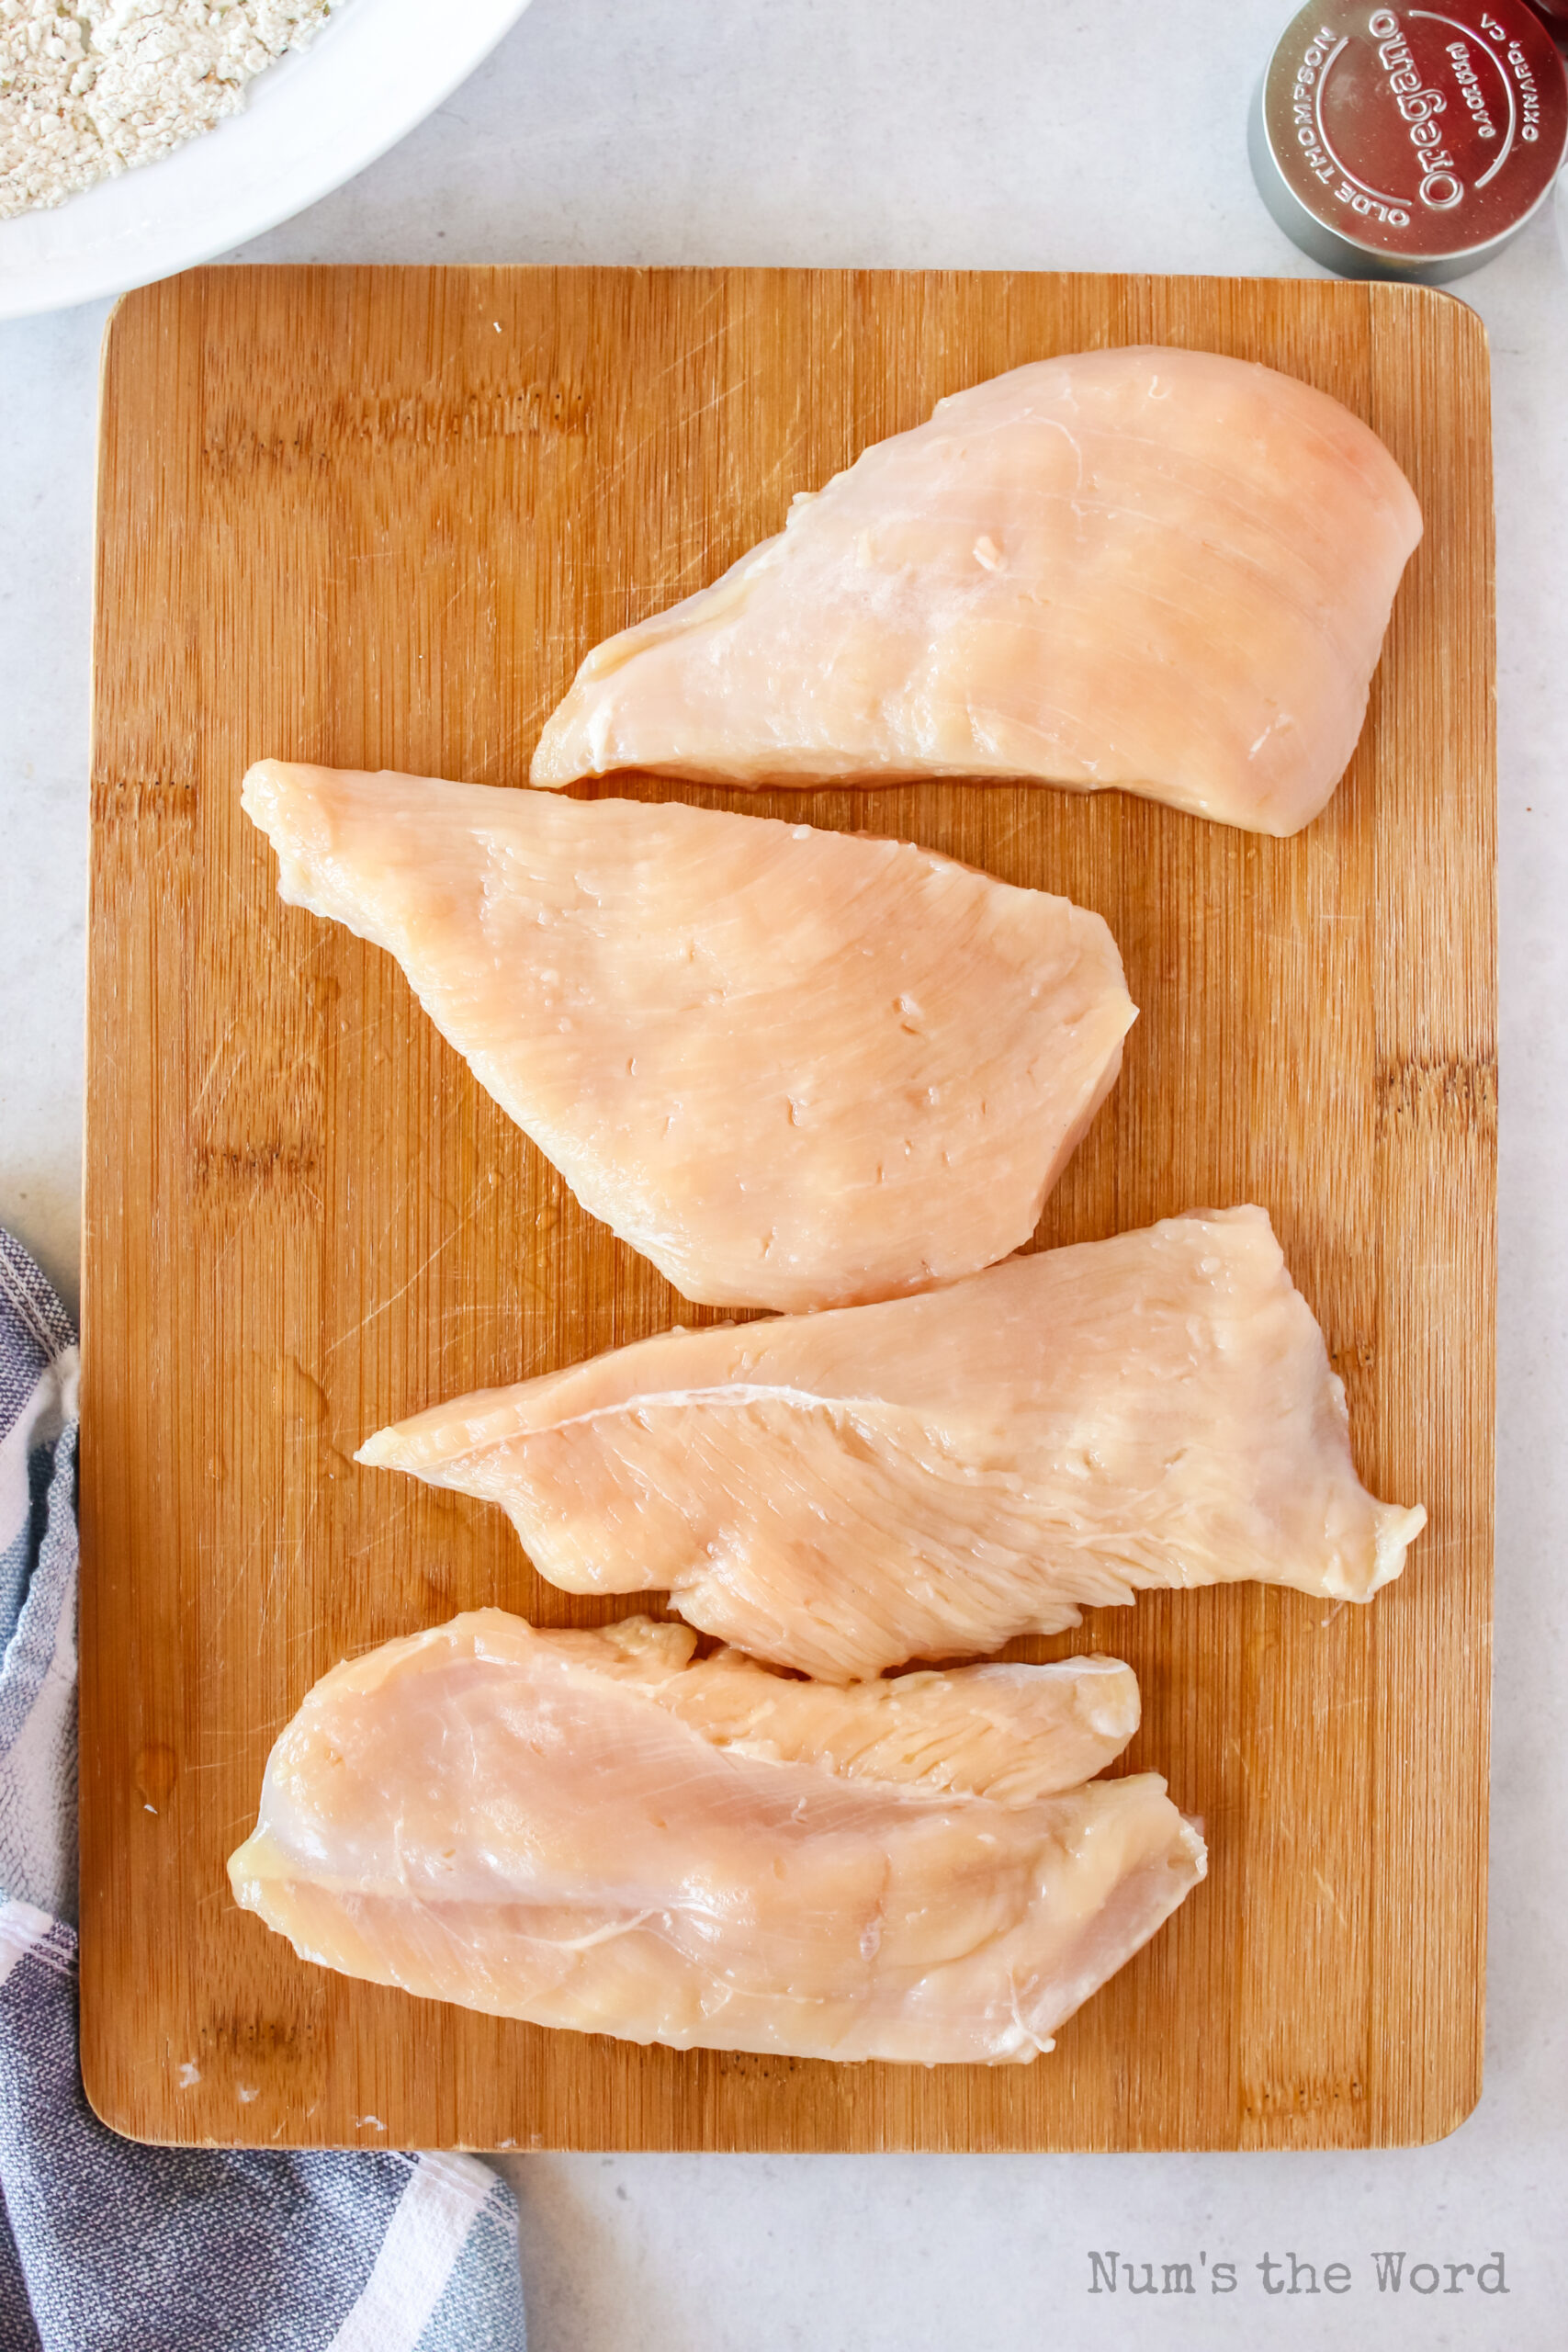 2 chicken breasts cut in half lengthwise to create 4 thinner breasts